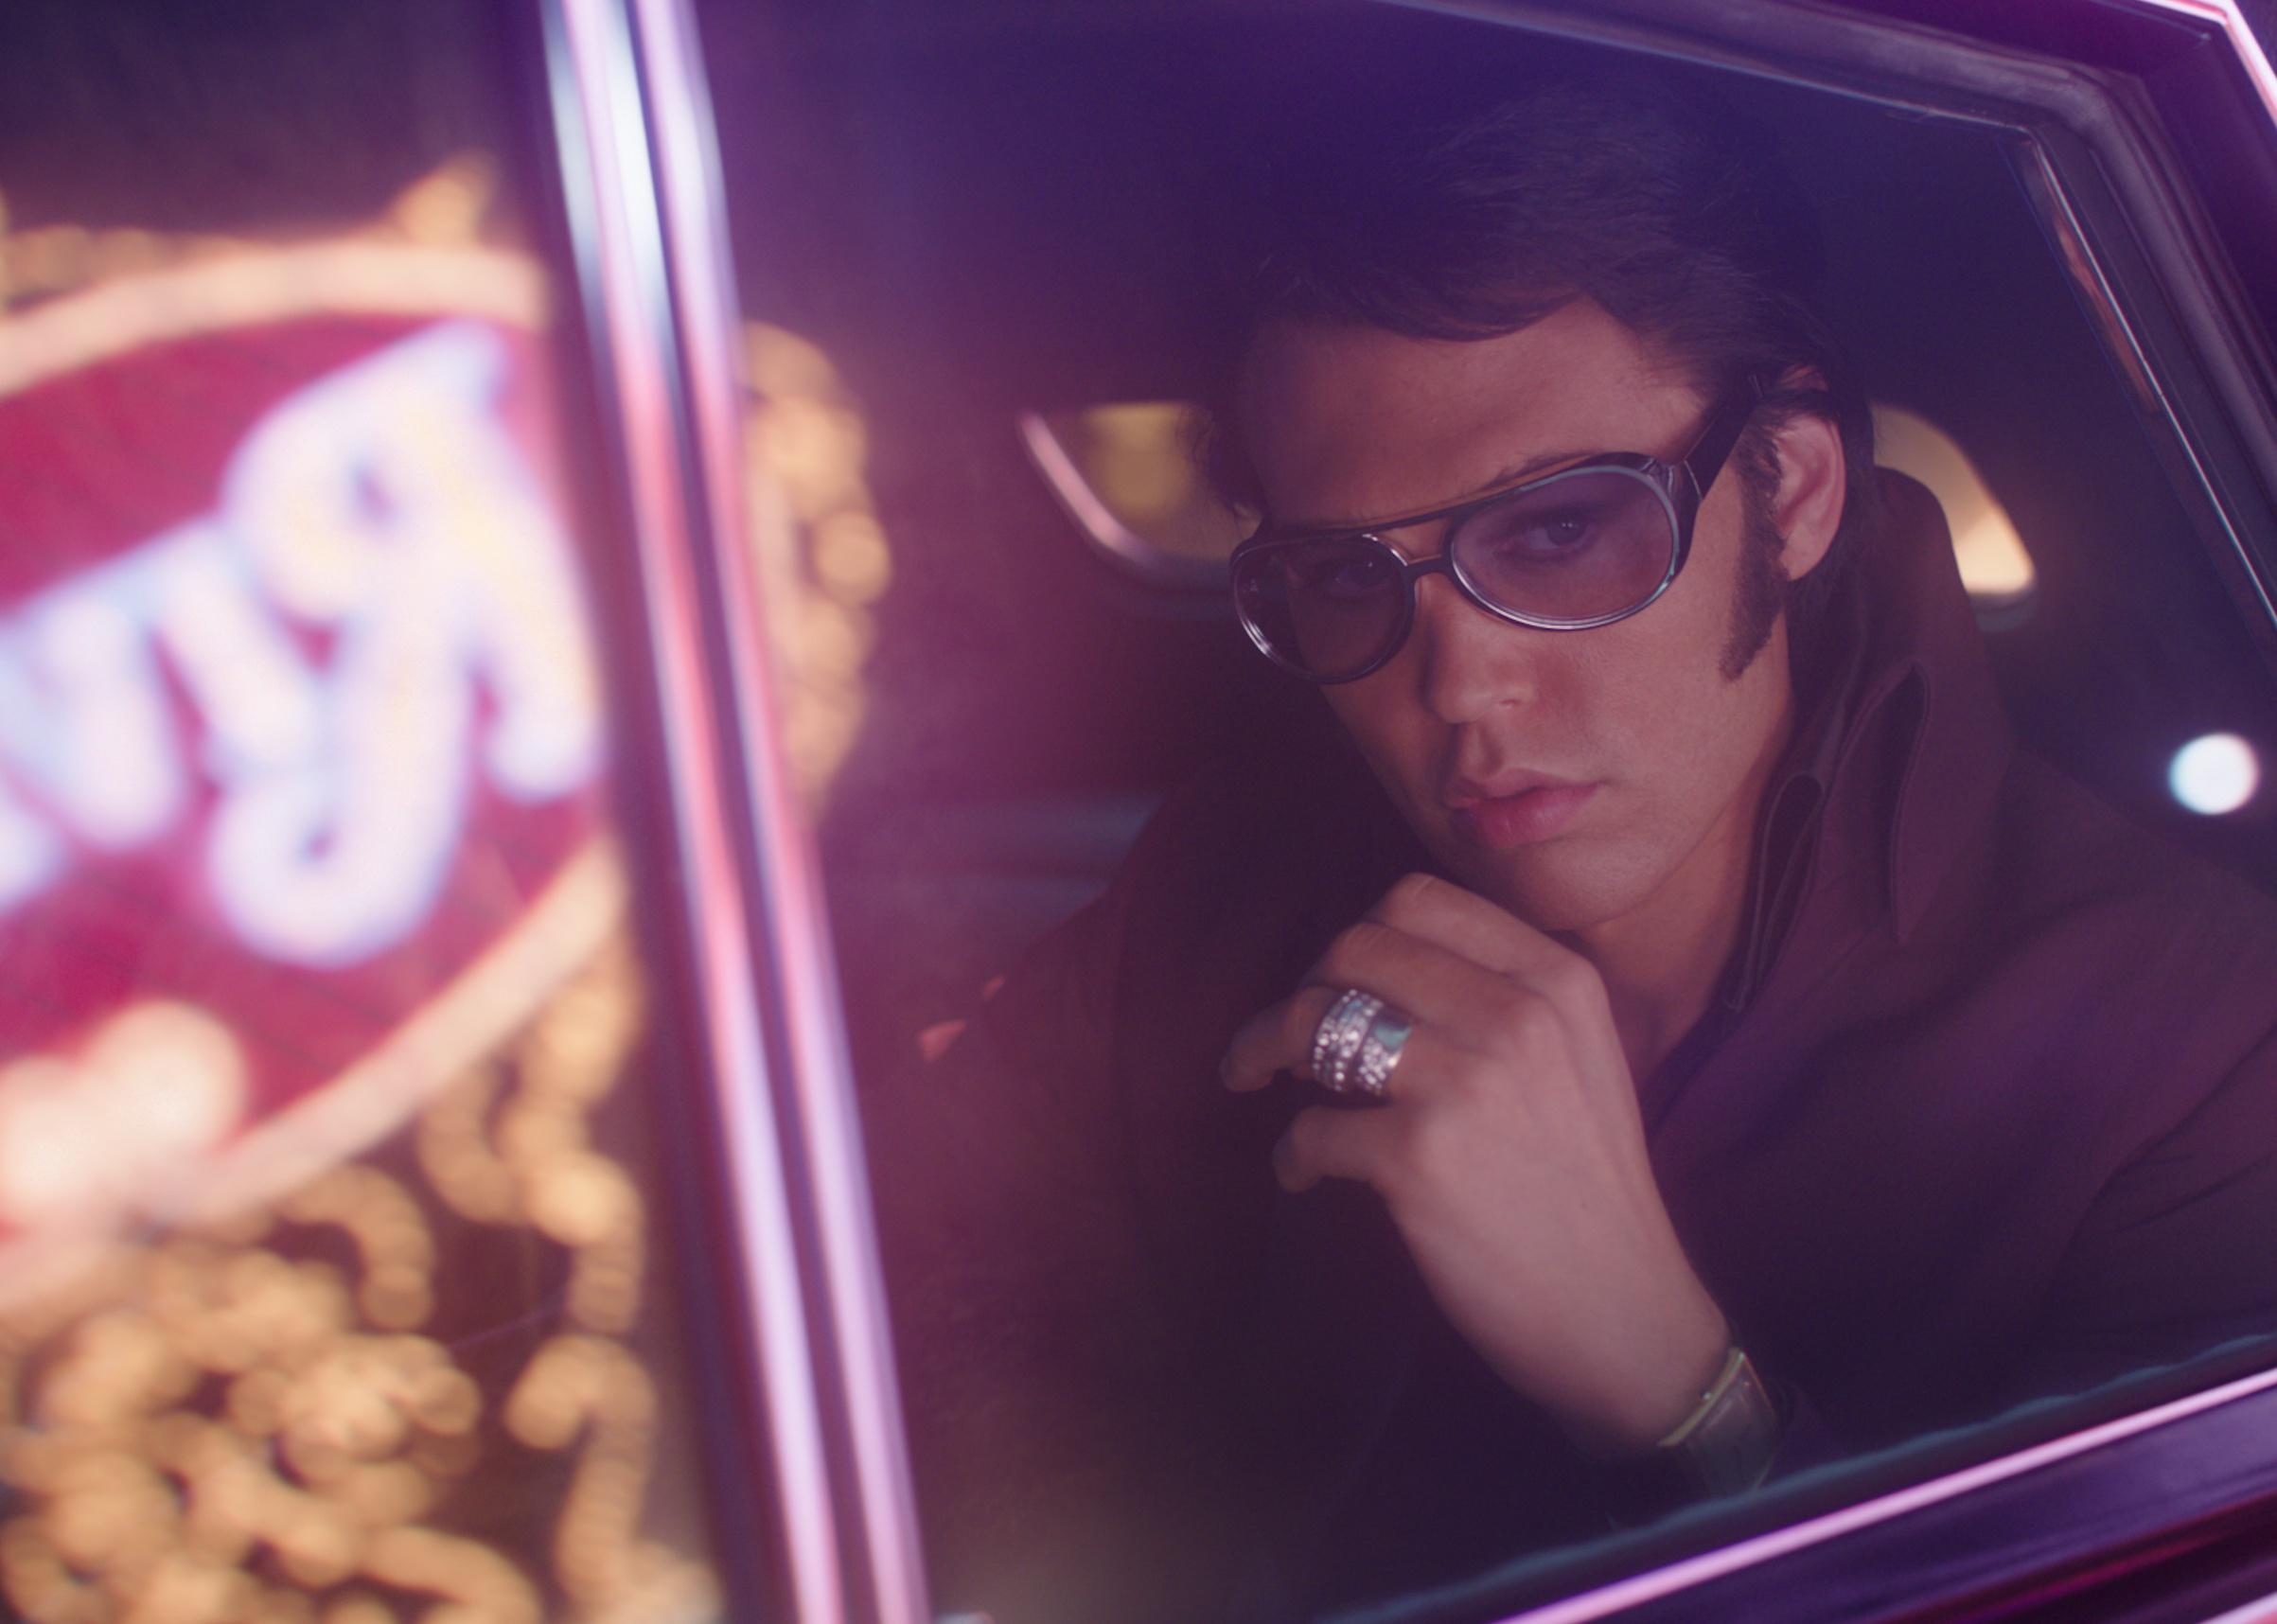 An actor playing Elvis in the backseat of a car with neon signs in the reflection of the car window.